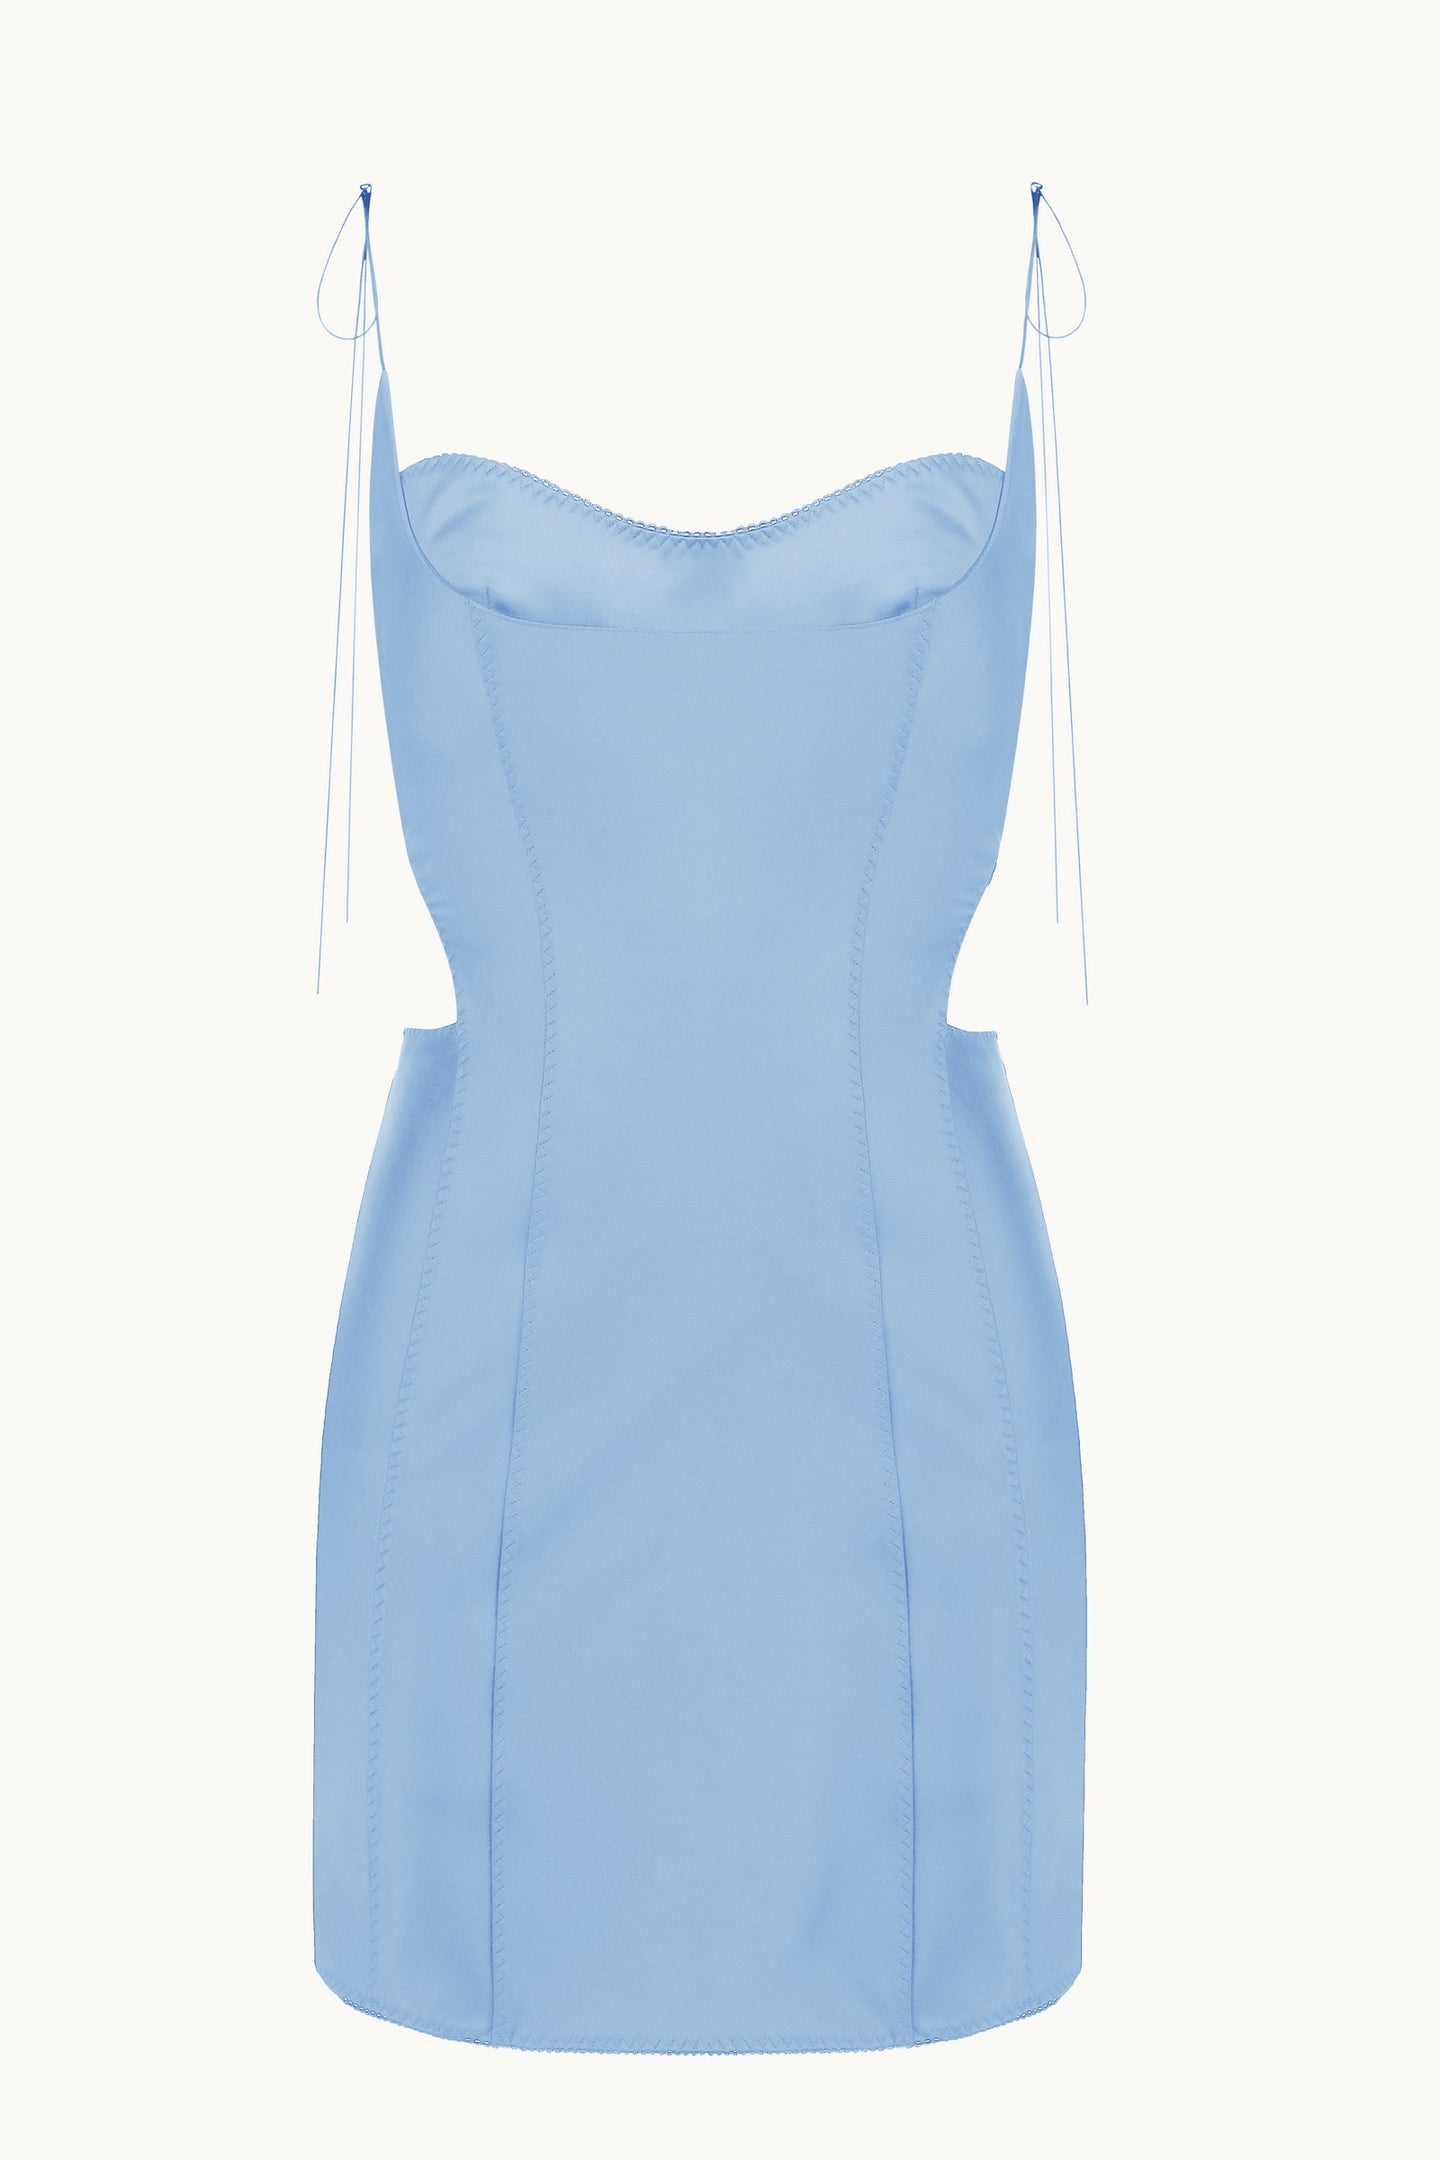 Vivienne baby blue dress front view